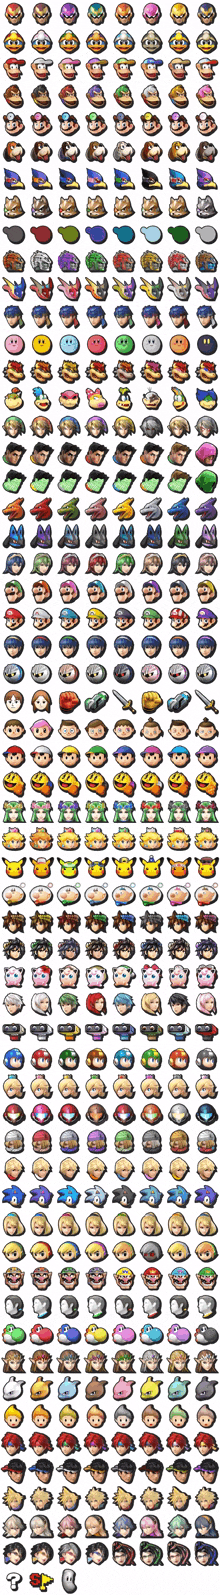 super smash bros for nintendo 3ds nintendo 3ds icons characters smash bros